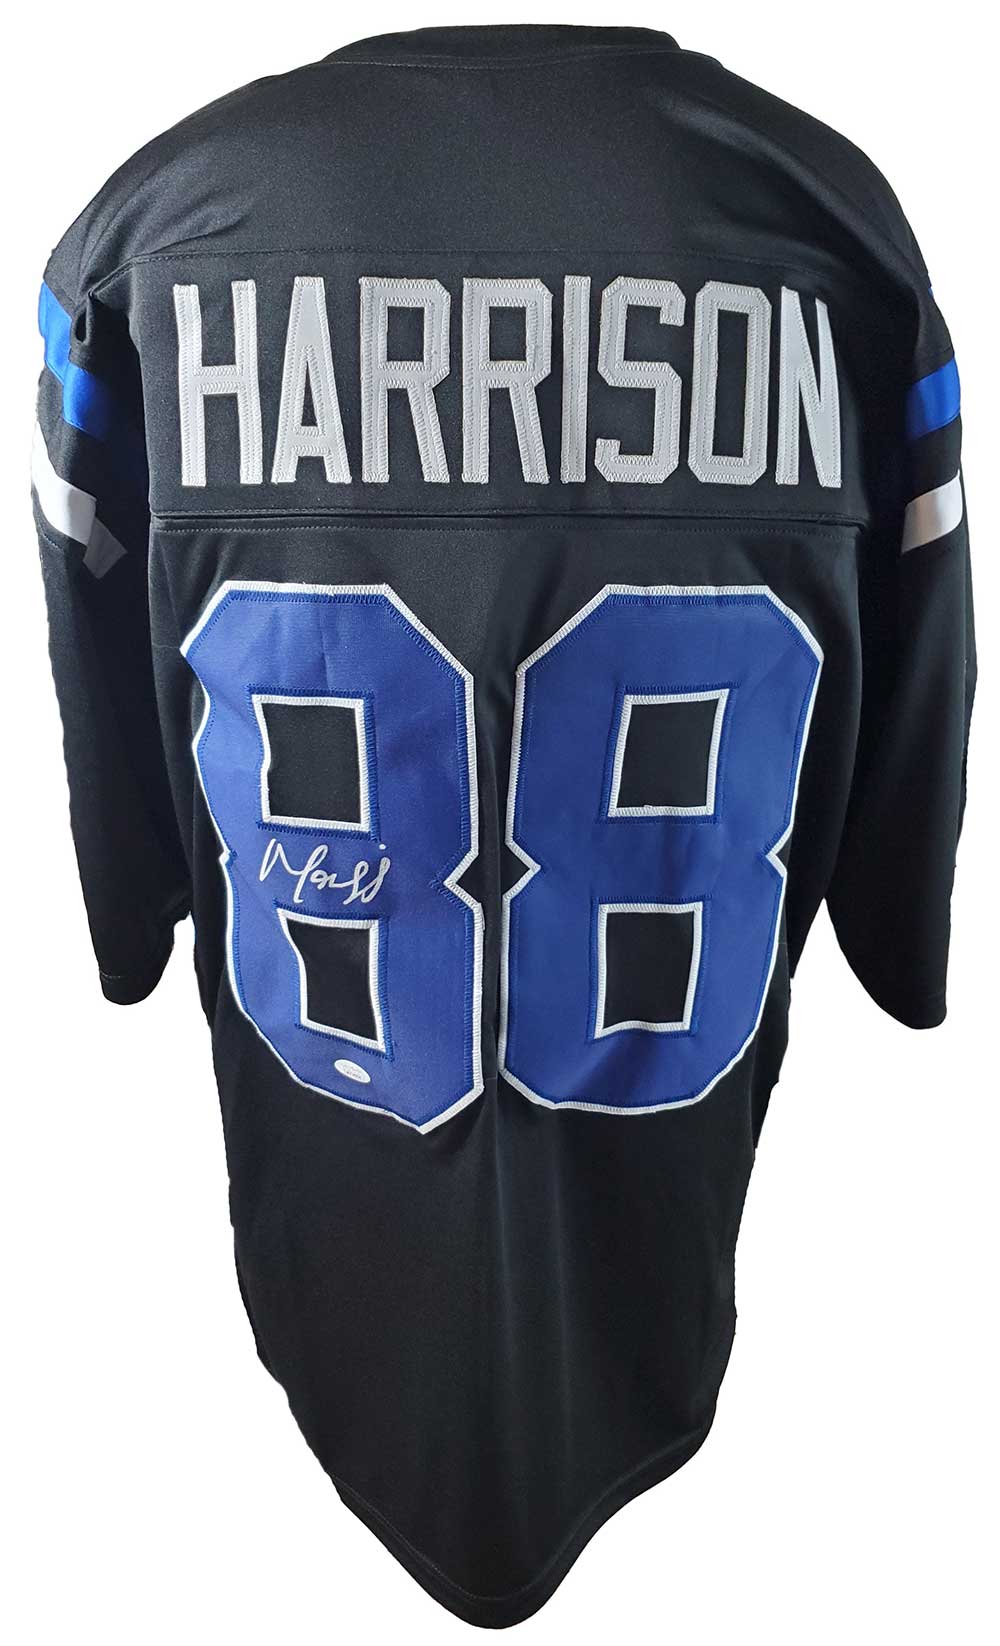 Indianapolis Colts Marvin Harrison Autographed Pro Style Black